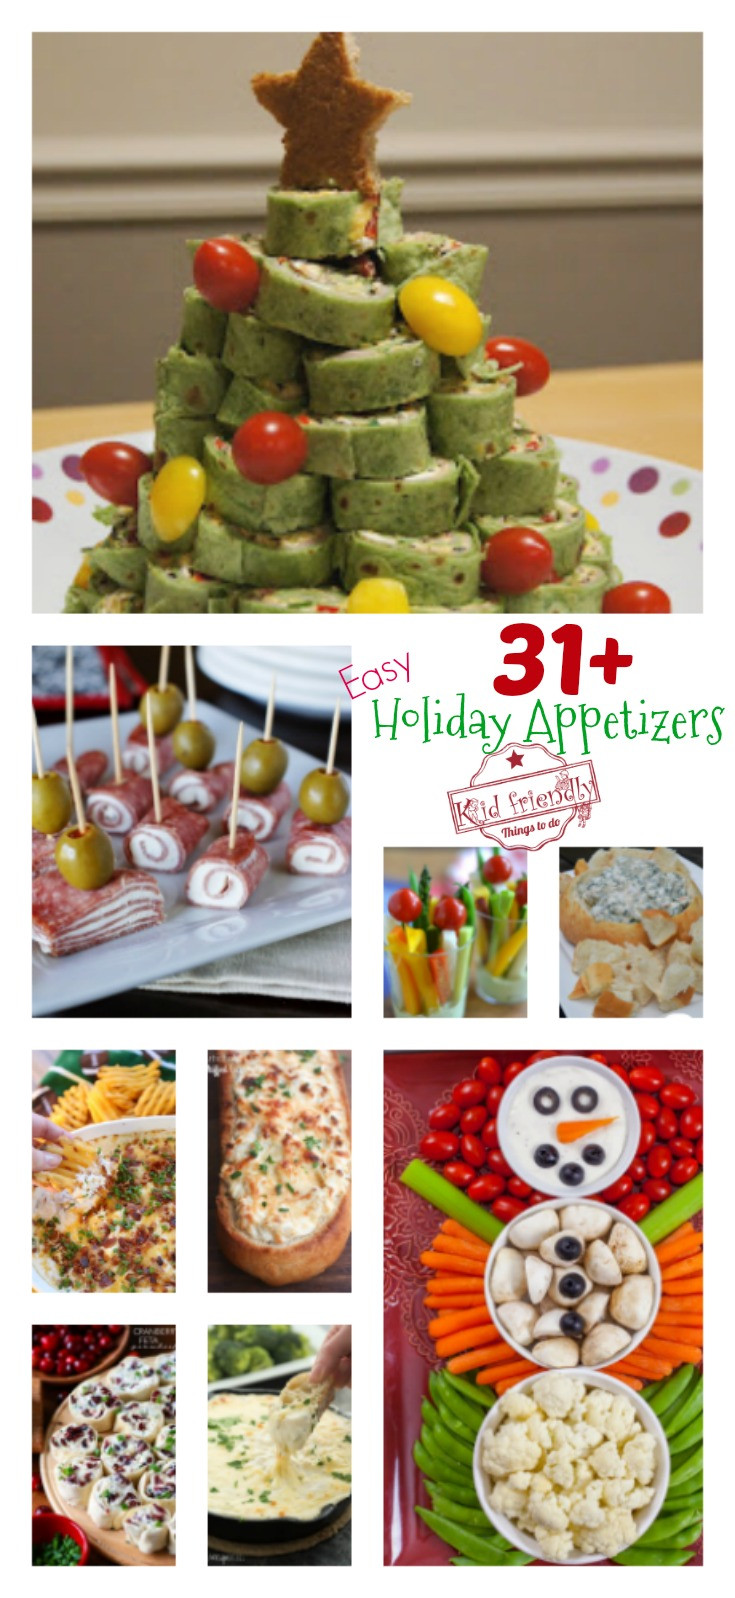 Easy Christmas Appetizers
 Over 31 Easy Holiday Appetizers to Make for Christmas New